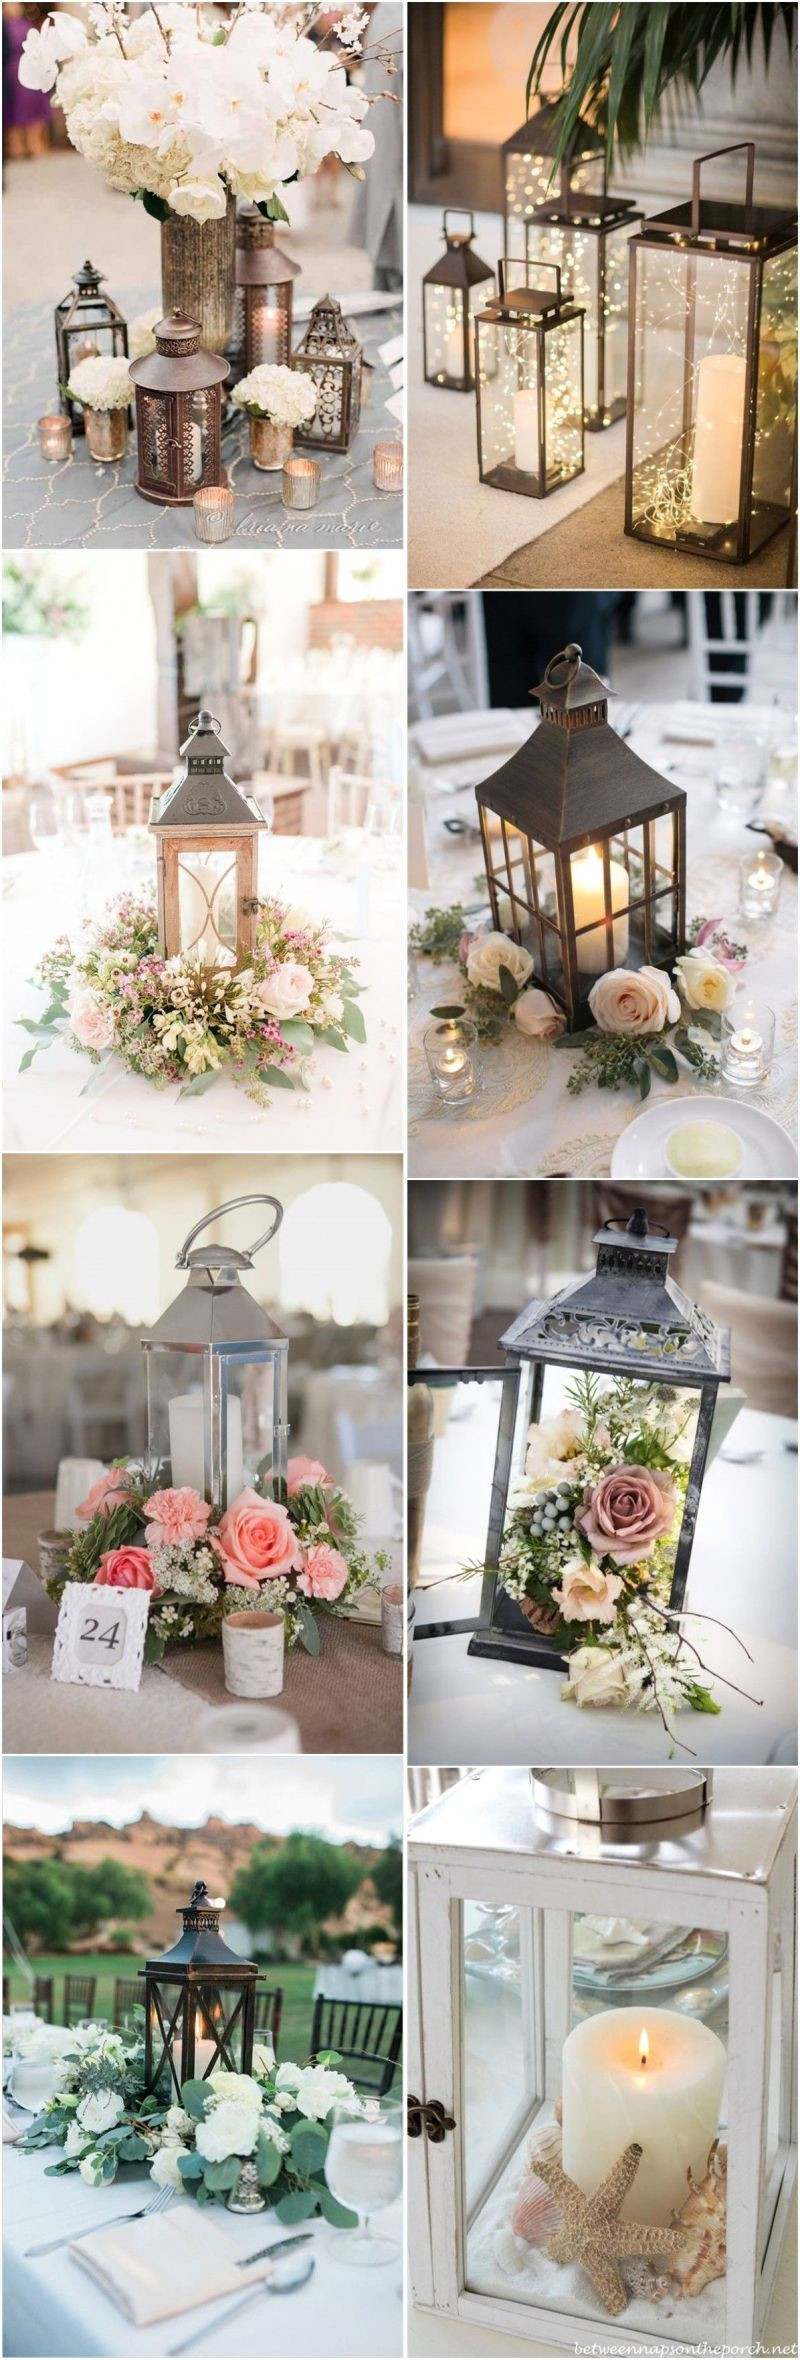 11 Ideal Used Wedding Centerpiece Vases for Sale 2022 free download used wedding centerpiece vases for sale of wedding centerpieces for sale cheap noseroom com regarding best wedding videography in consort with inexpensive wedding decorations new wedding cen